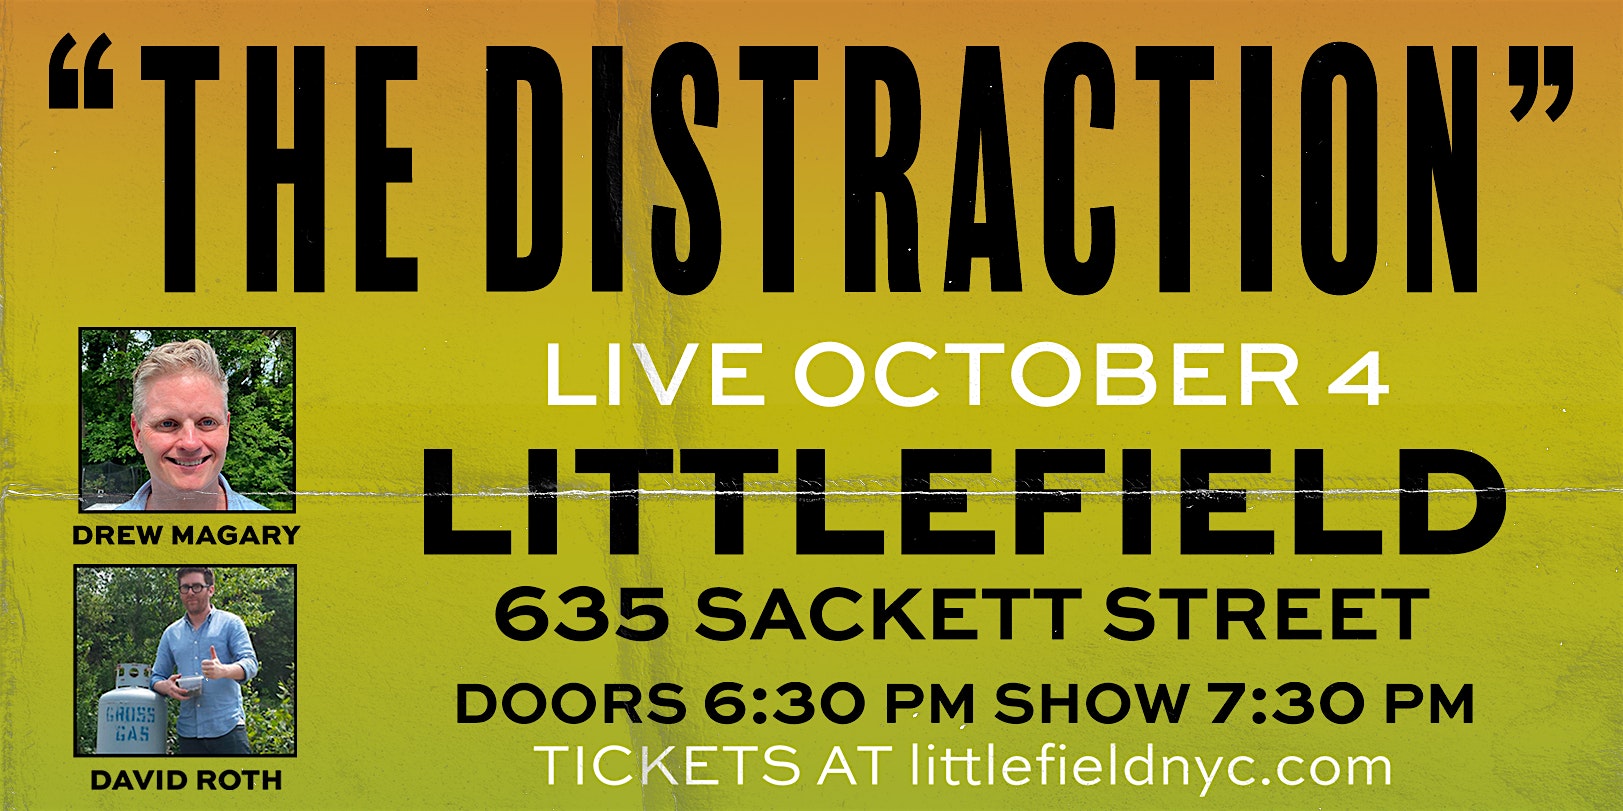 Defector Presents: The Distraction Live!